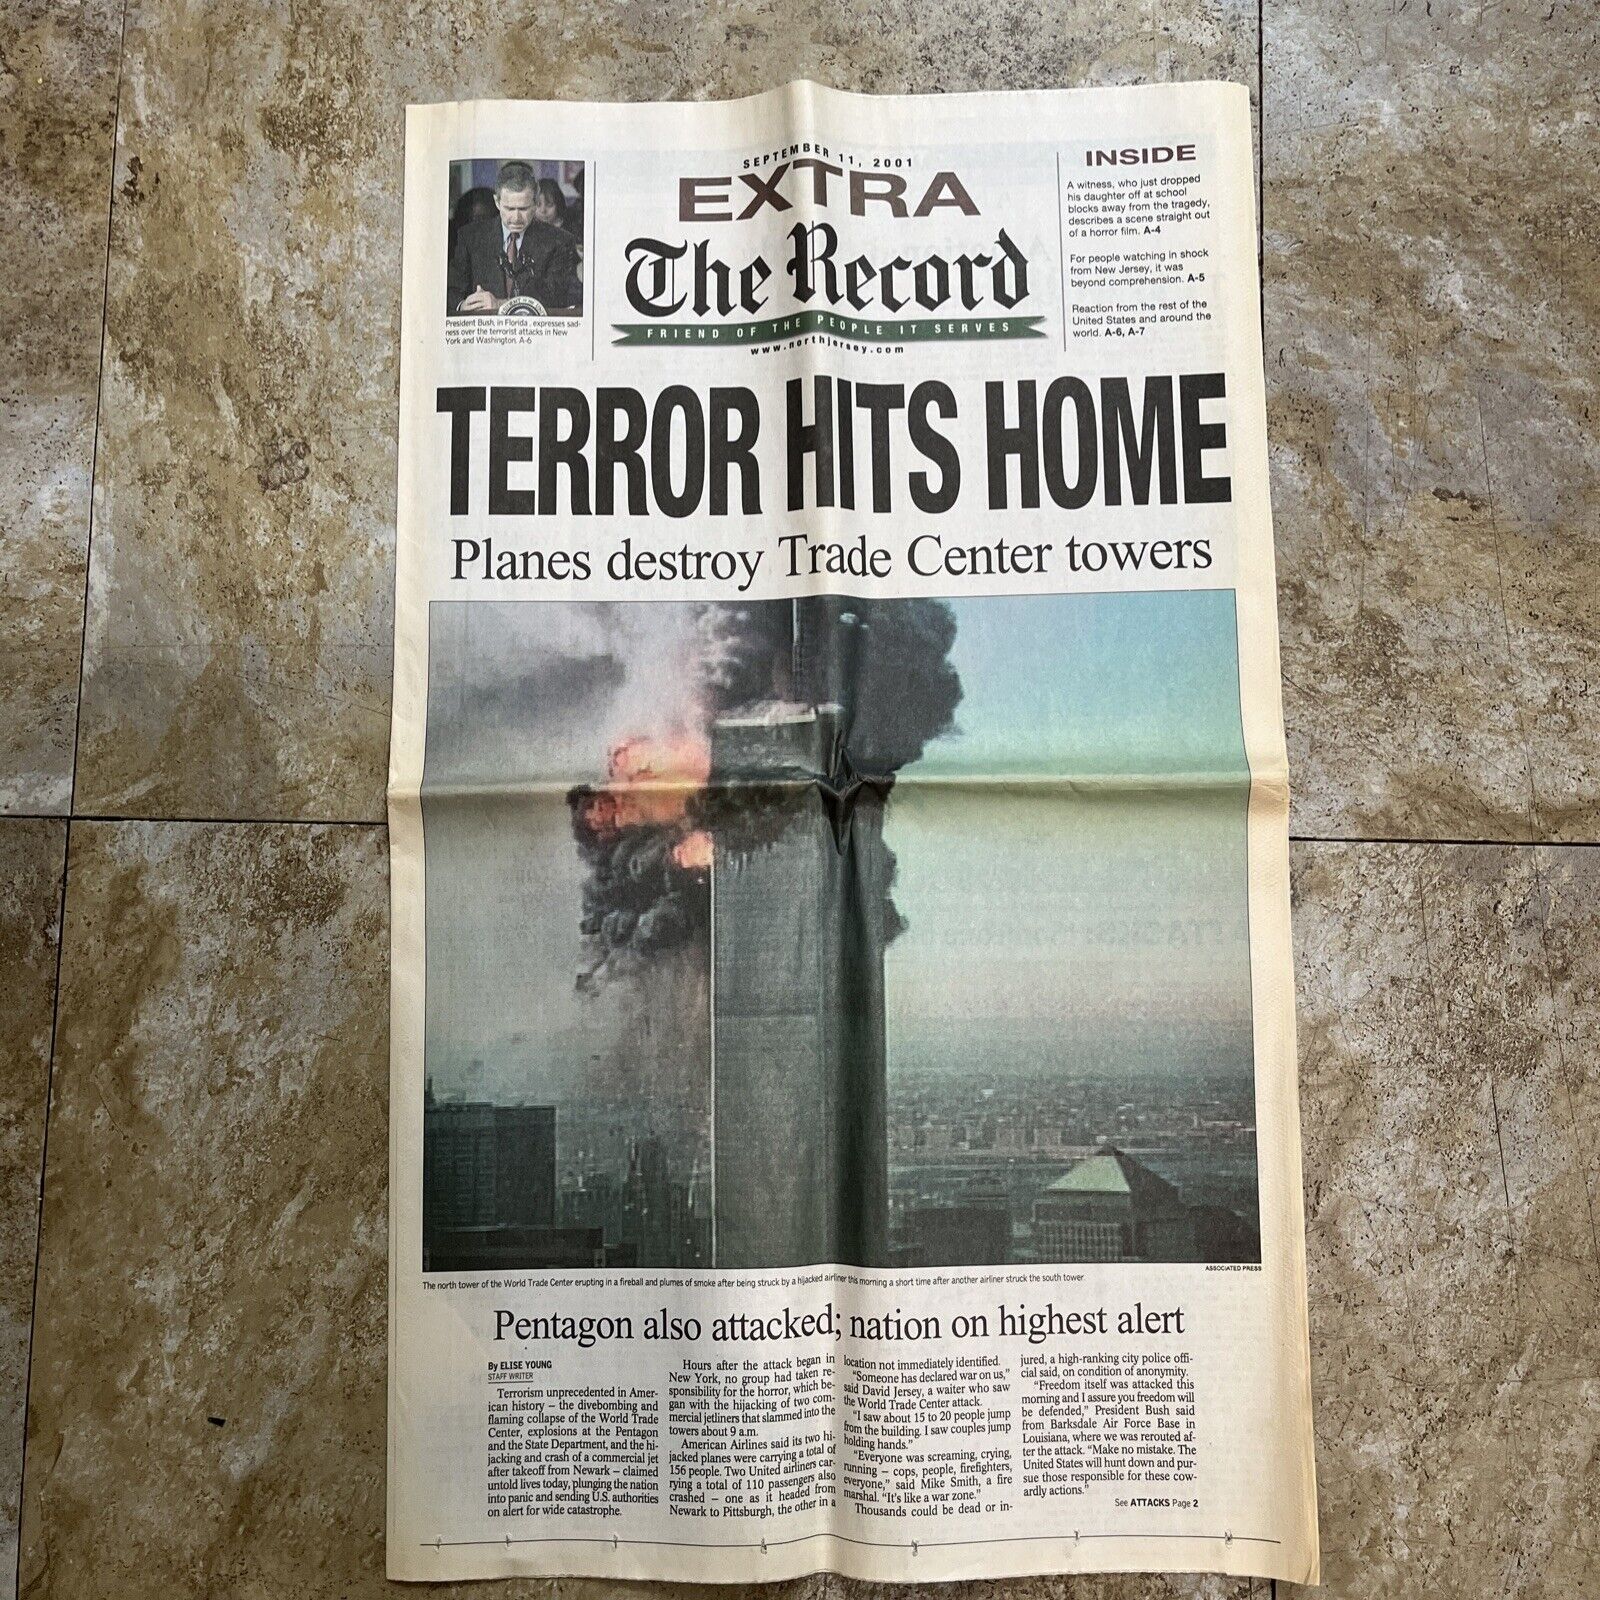 The Record September 11, 2001 9/11. Northern New Jersey